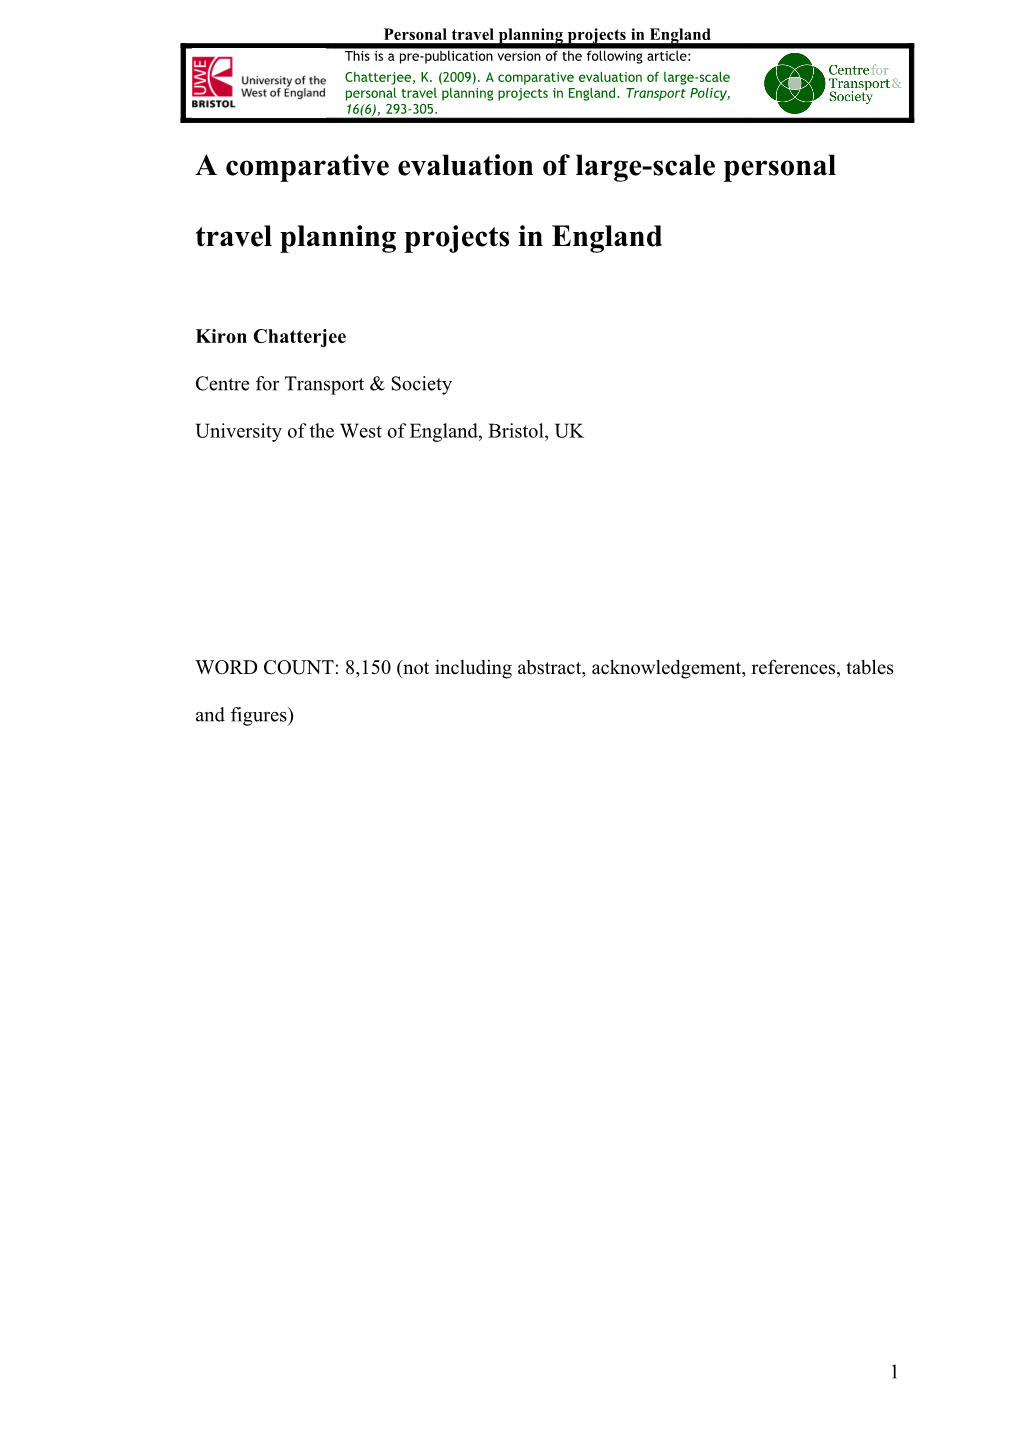 A Comparative Evluation of Large-Scale Personal Travel Planning Projects in England up to 2006